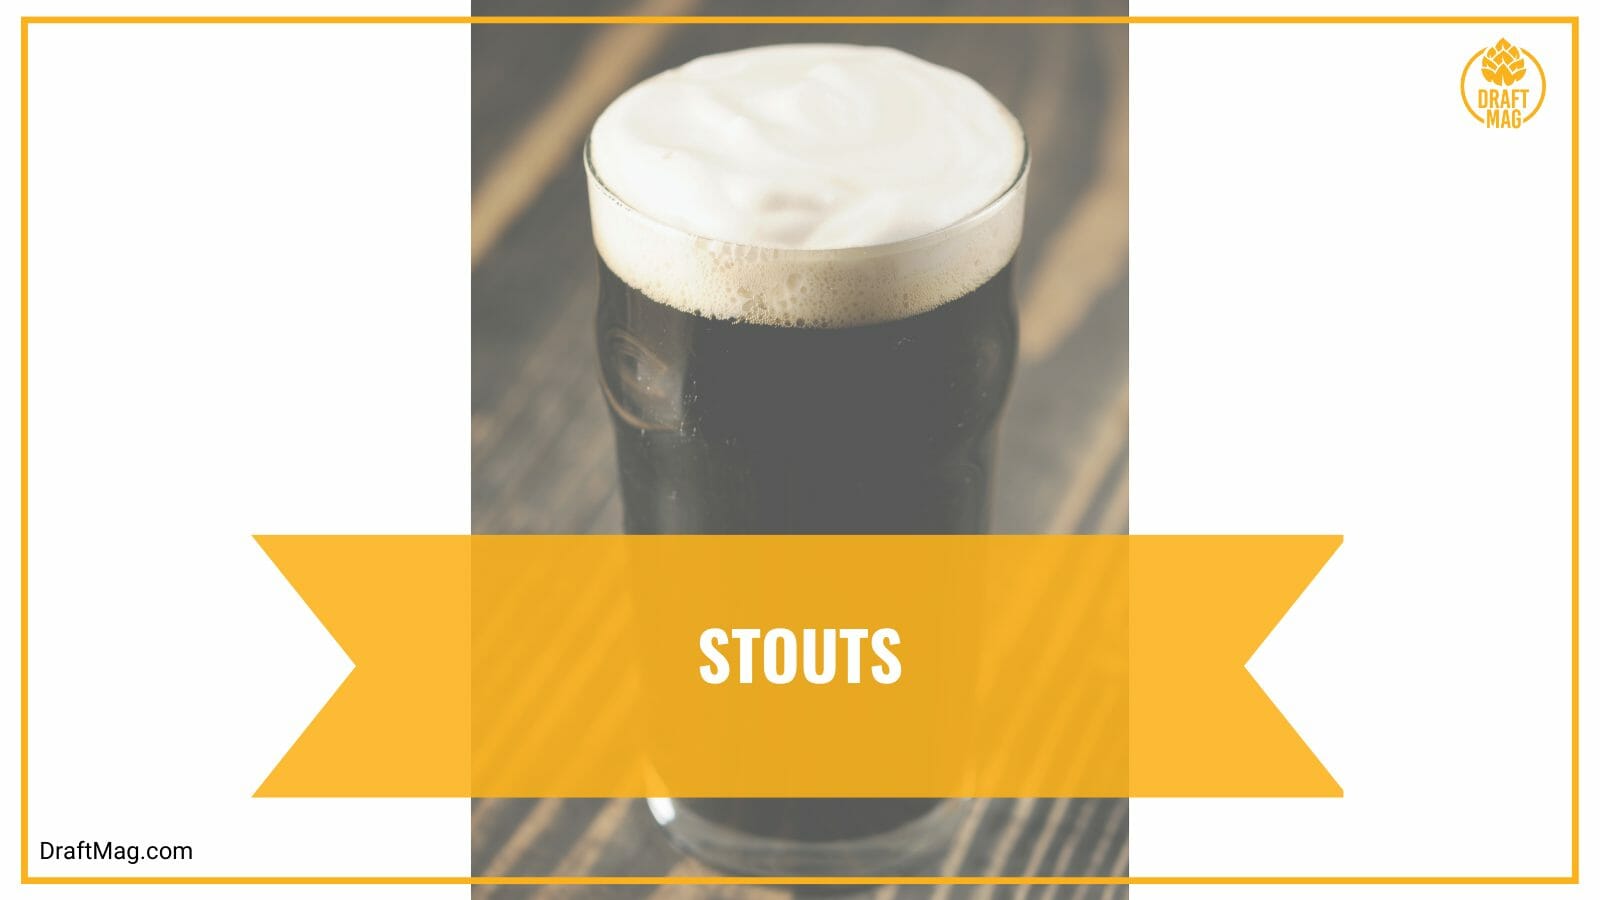 Stouts are dark beers